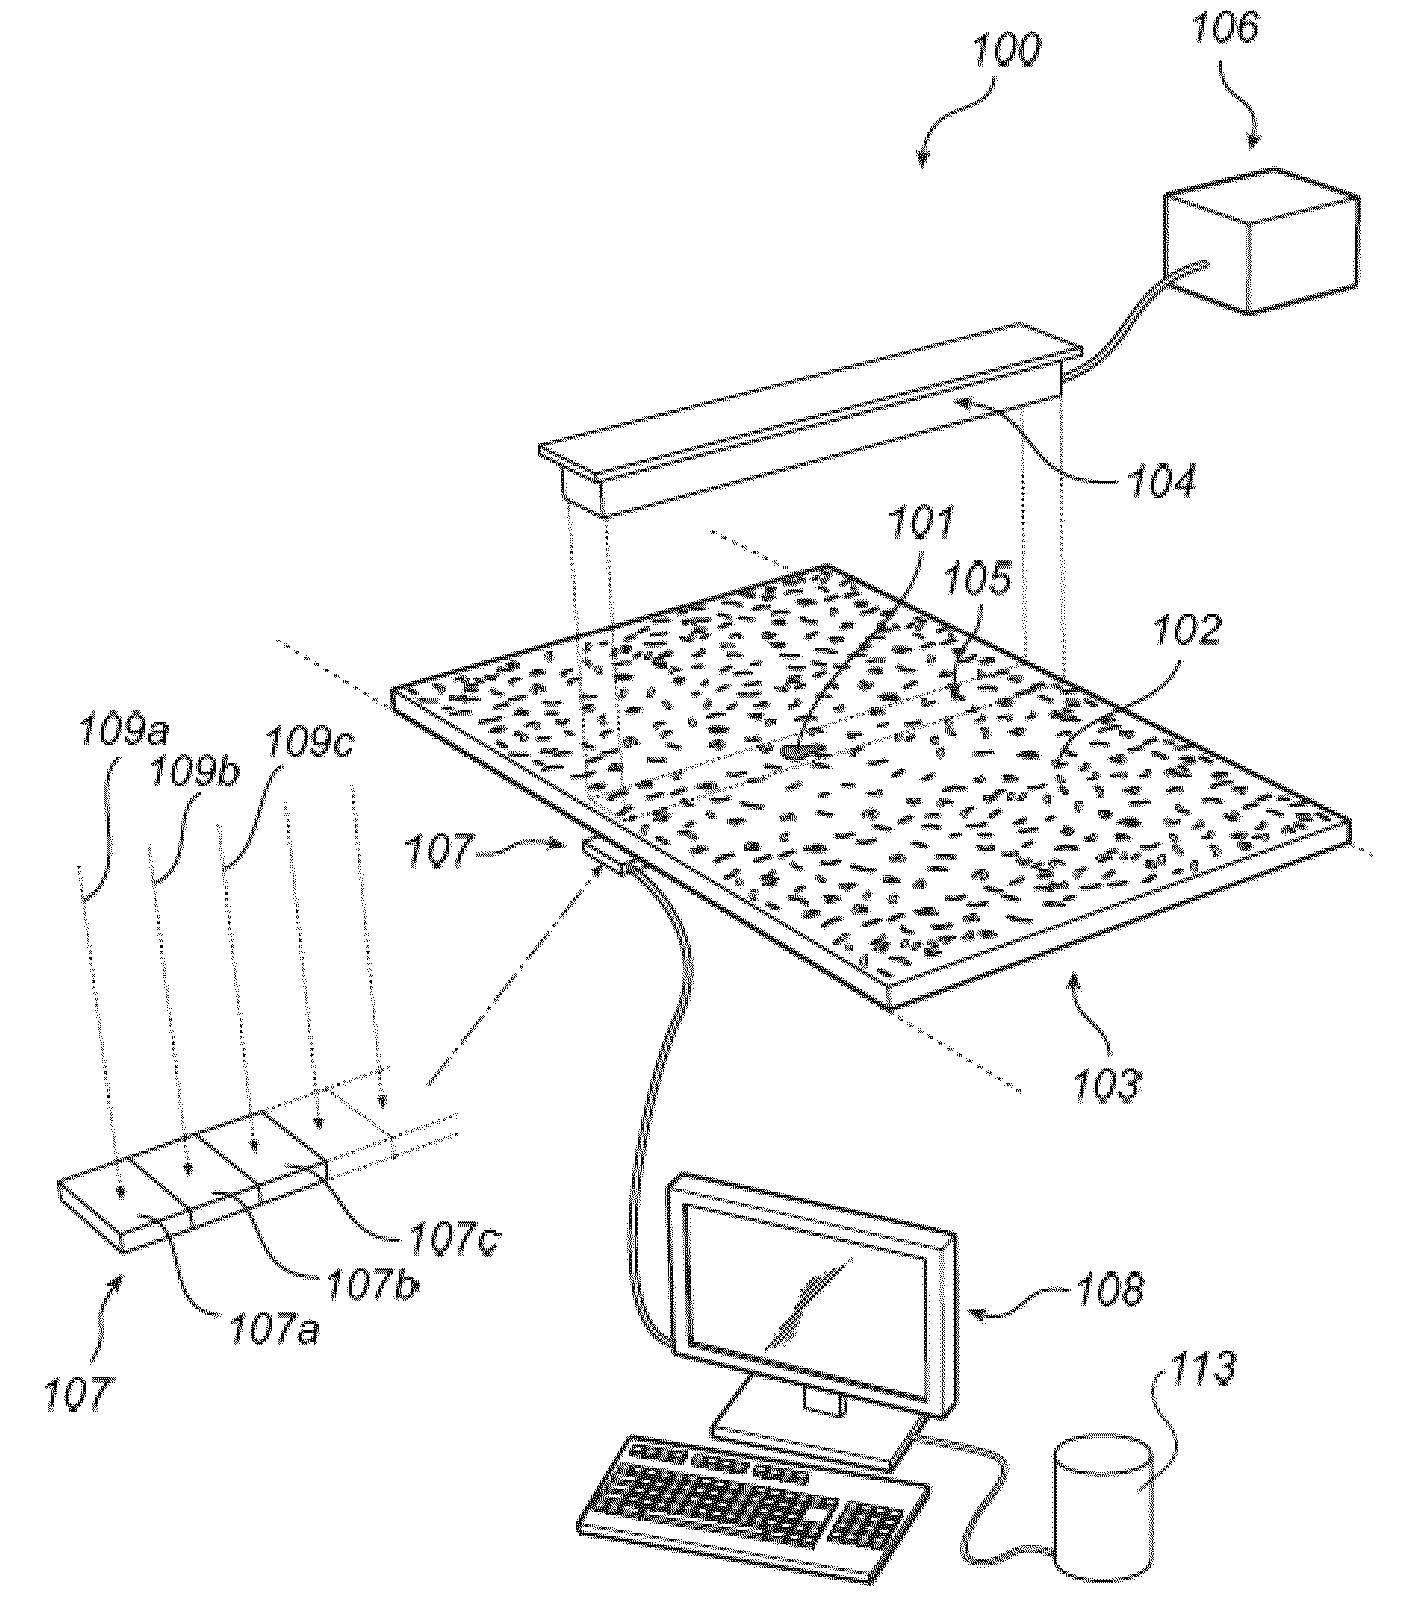 Method and apparatus for estimating the dry mass flow rate of a biological material